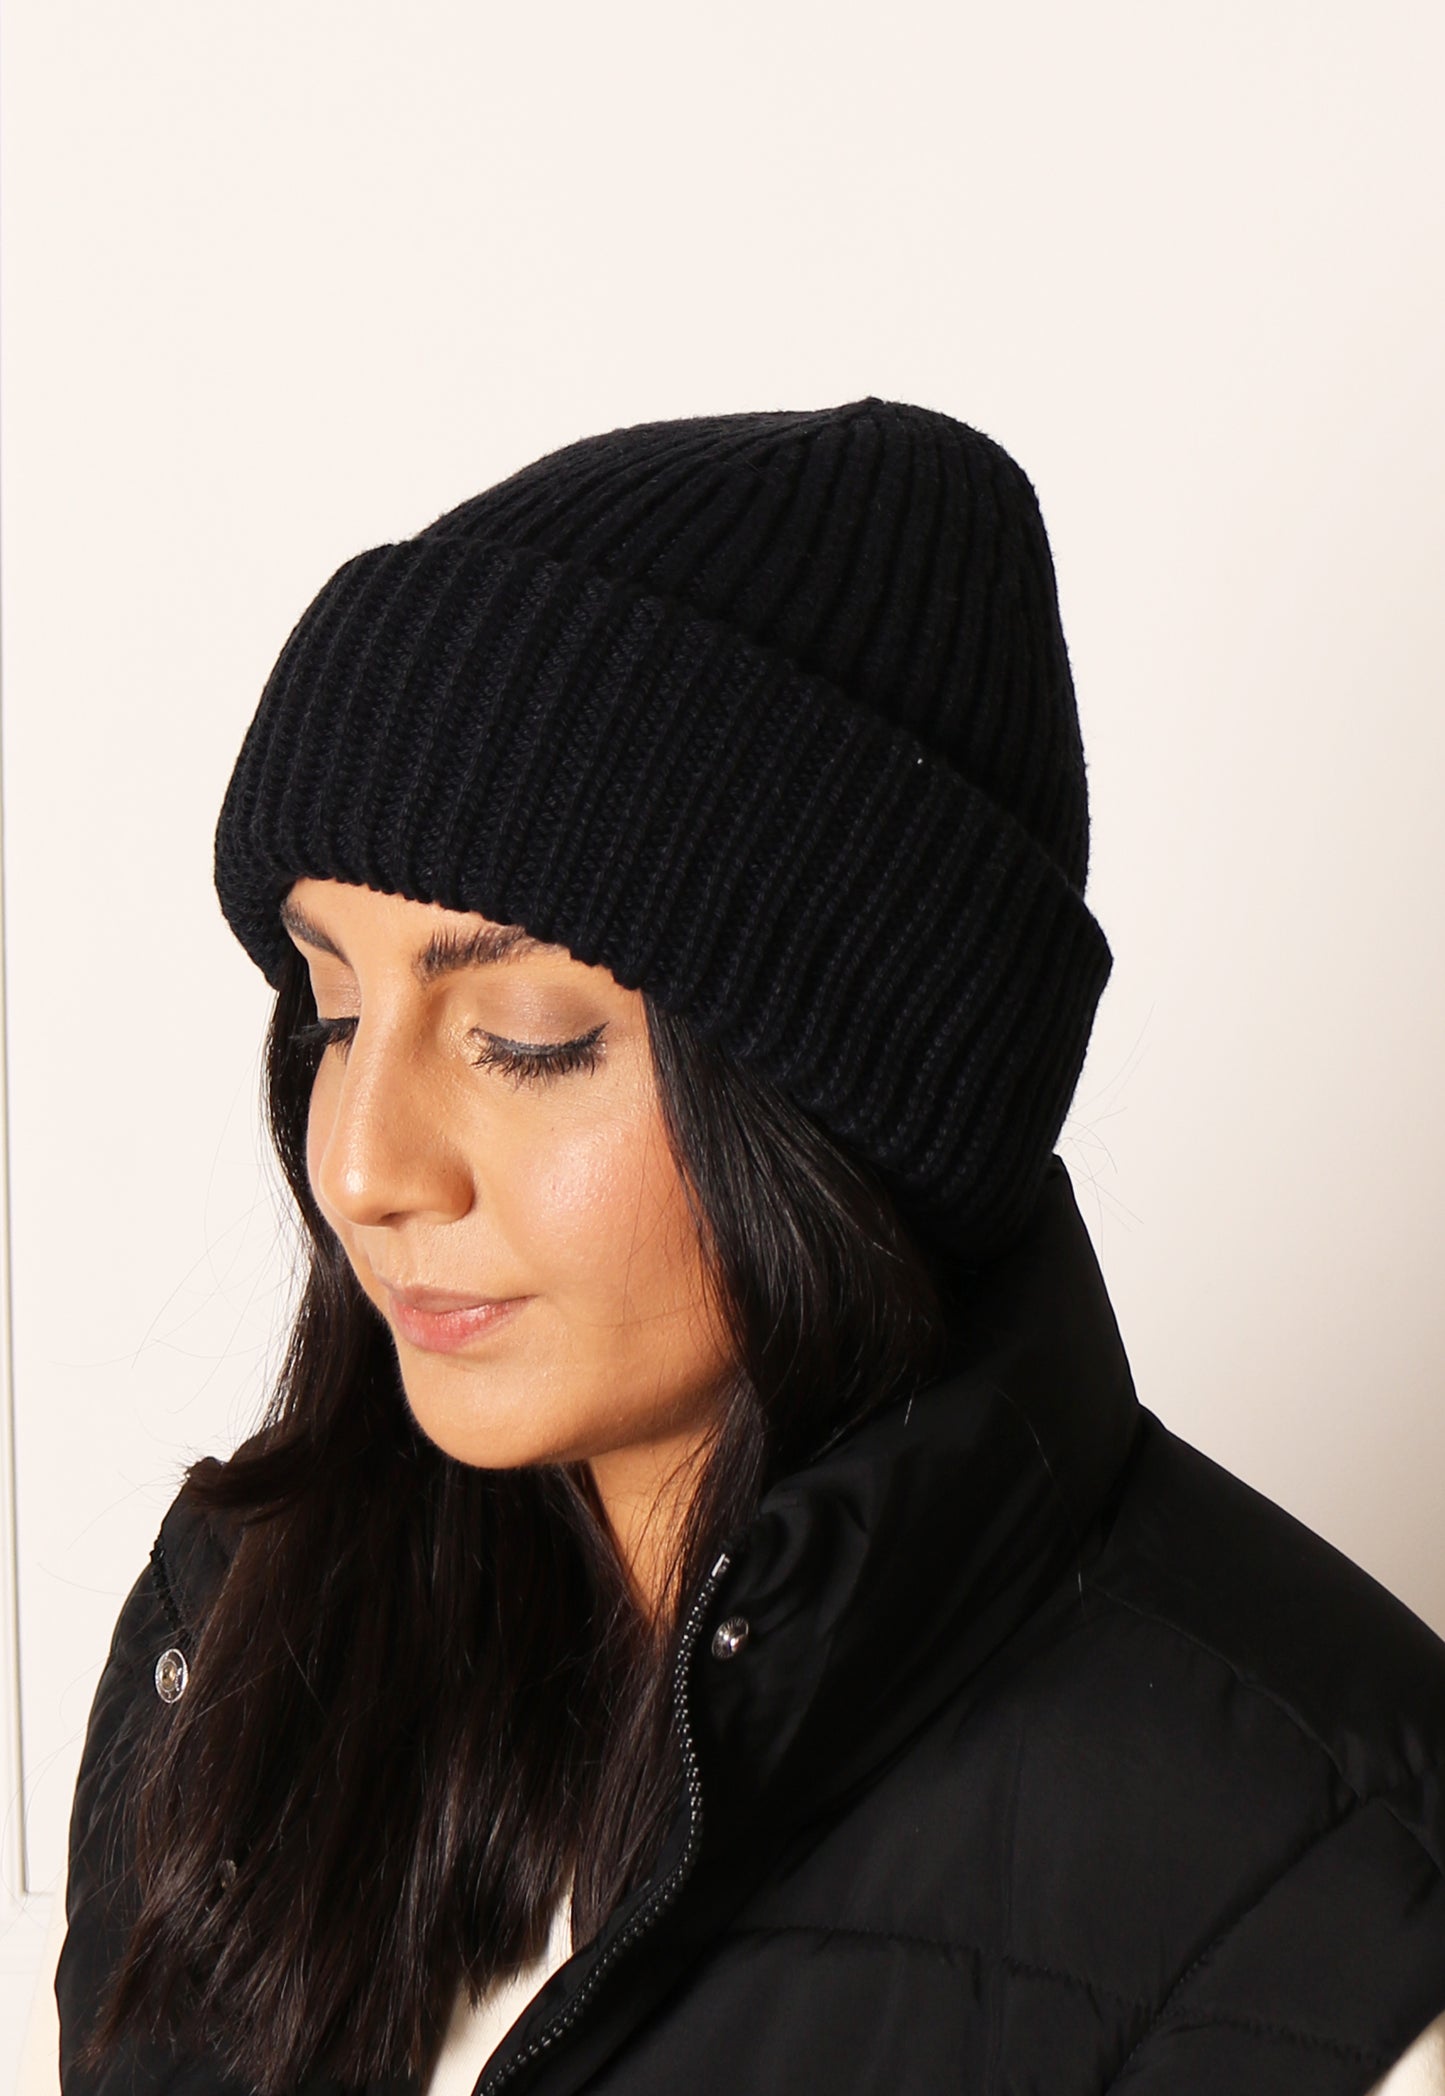 PIECES Juca Fisherman Rib Knit Beanie Hat in Black - One Nation Clothing